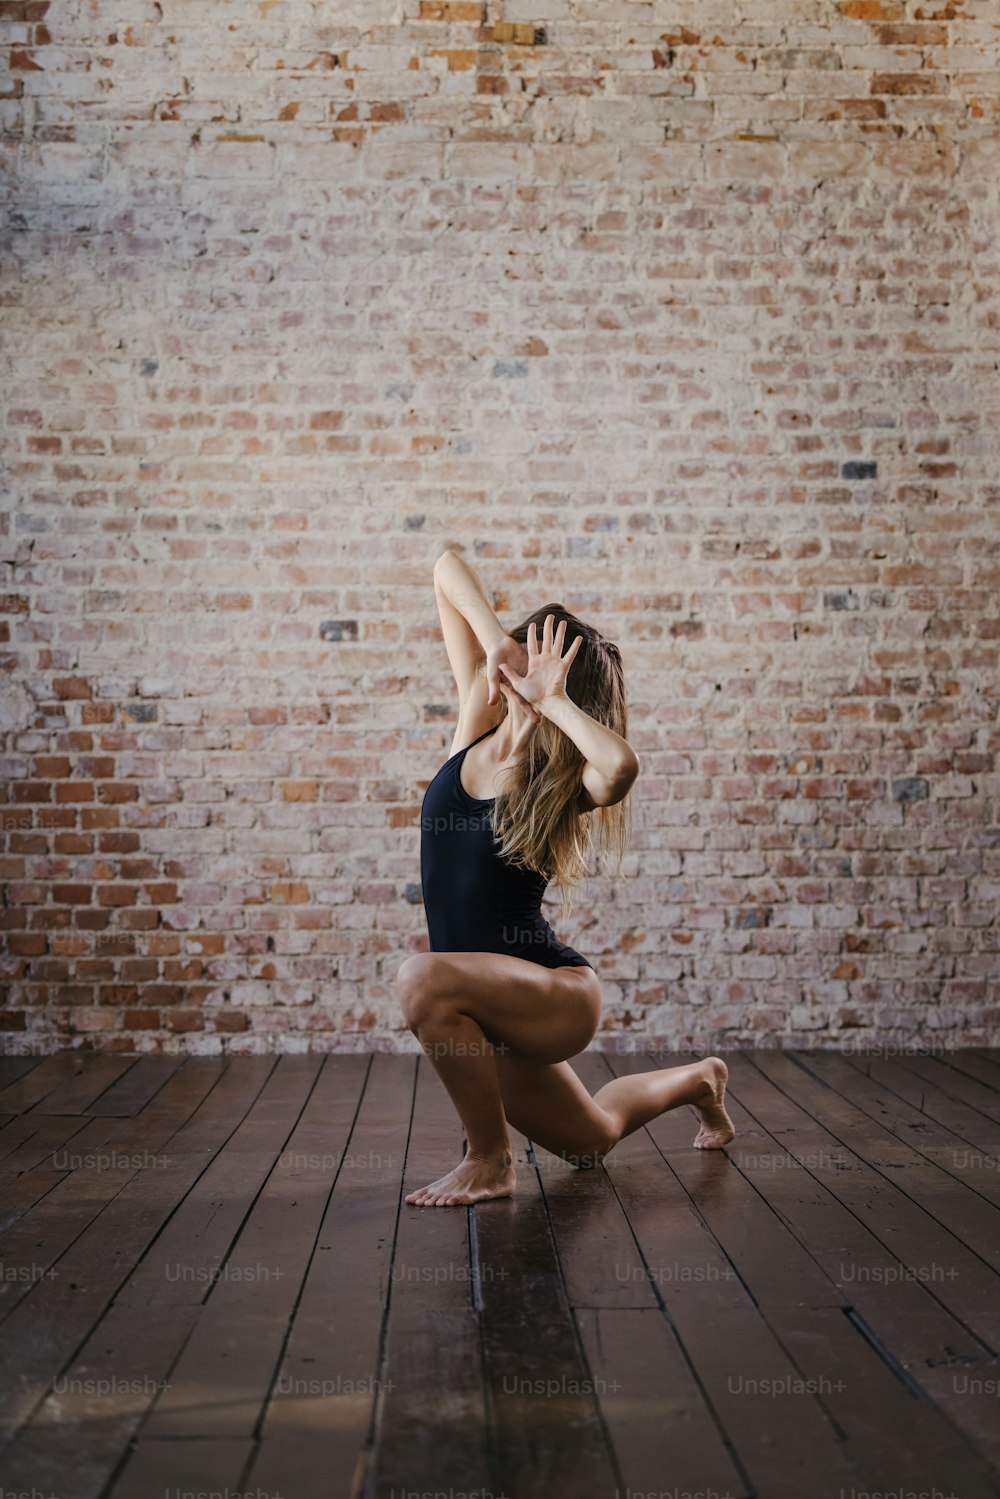 a woman kneeling on a wooden floor in front of a brick wall